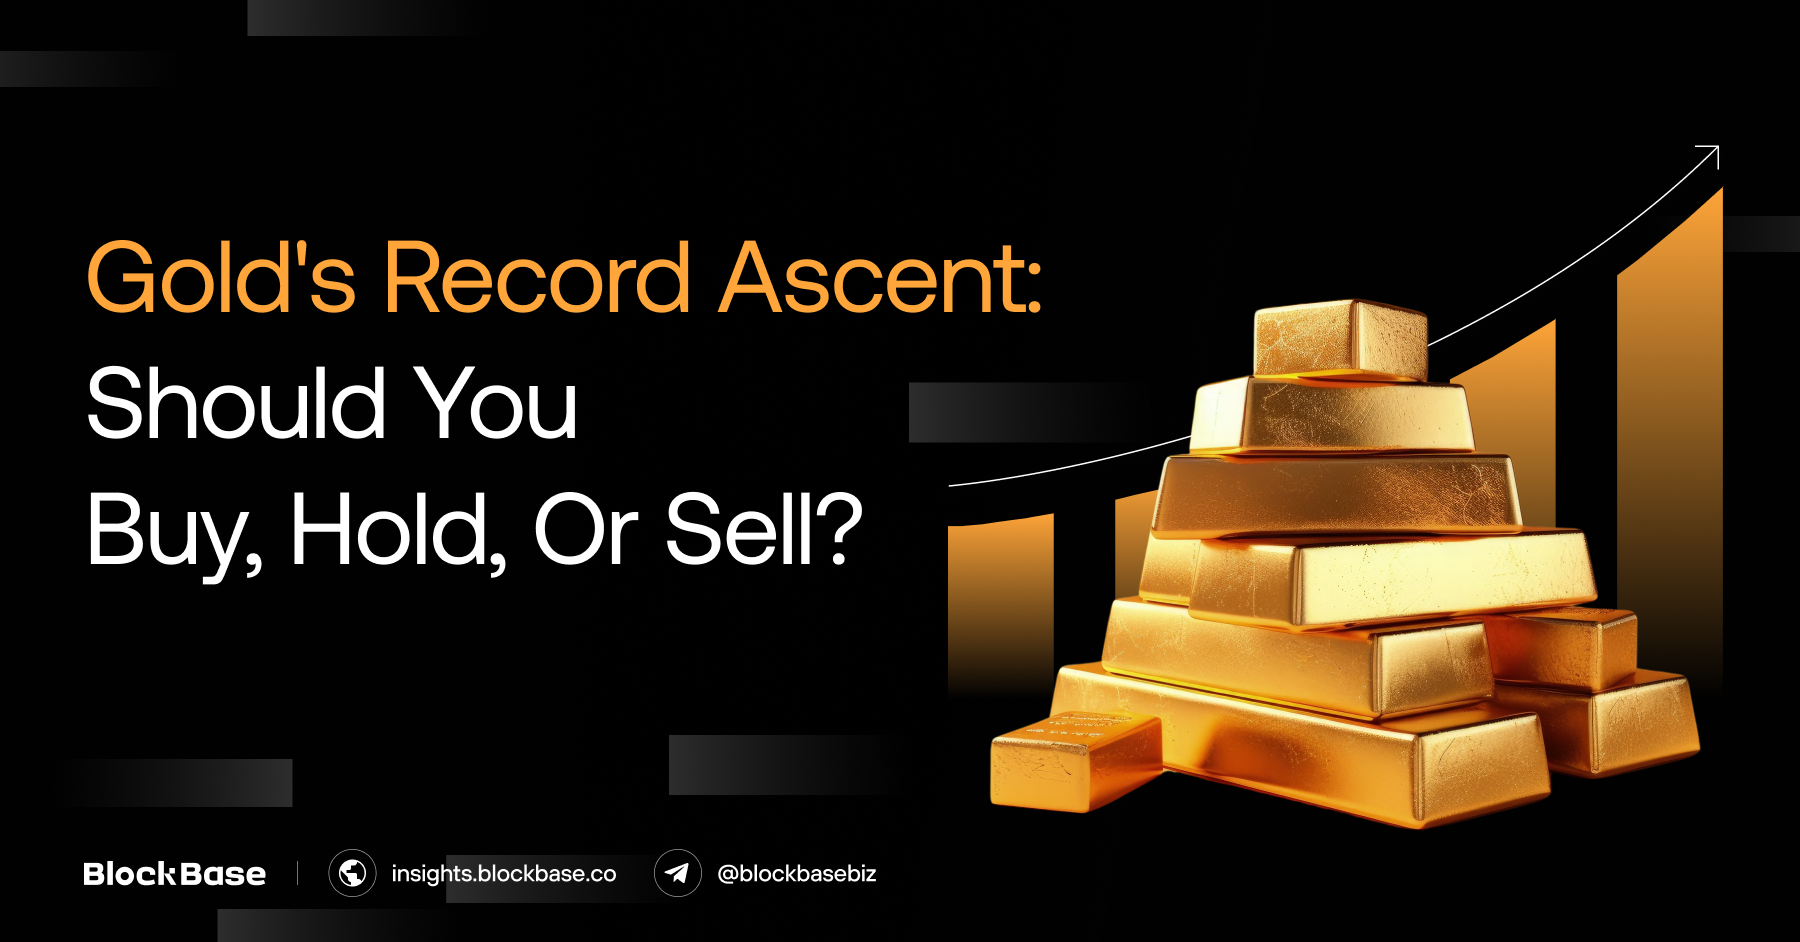 Gold’s Record Ascent: Should You Buy, Hold, or Sell?